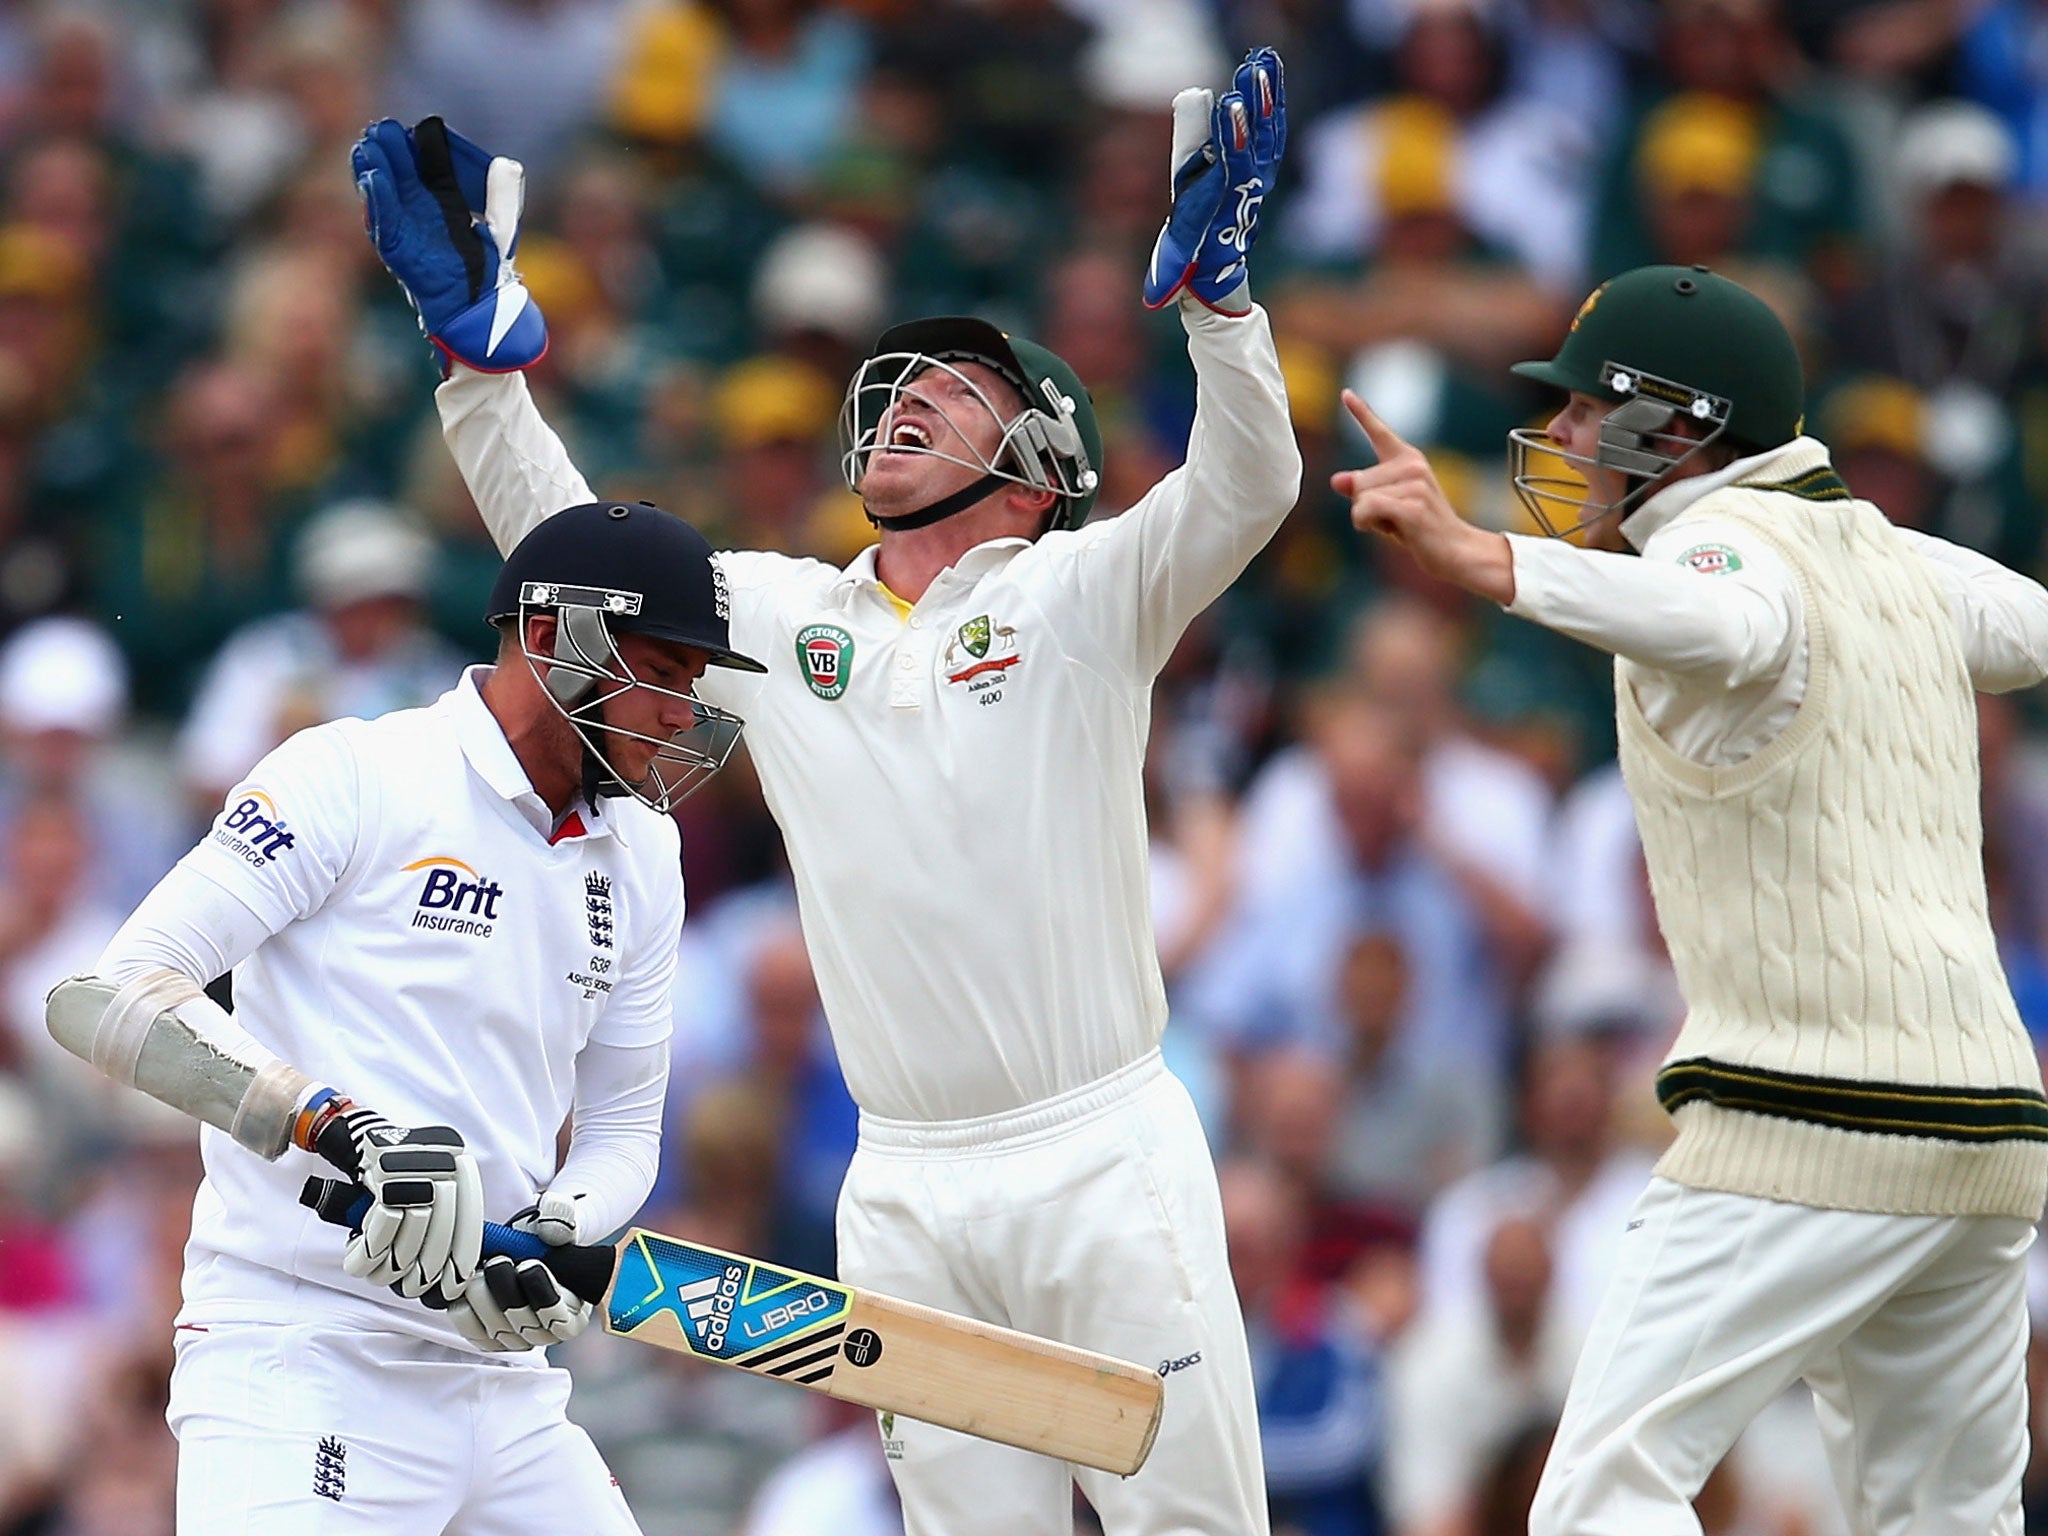 Brad Haddin (centre) catches Stuart Broad (left) off the bowling of Nathan Lyon during day four of the third Ashes Test between England and Australia at Old Trafford on 4 August